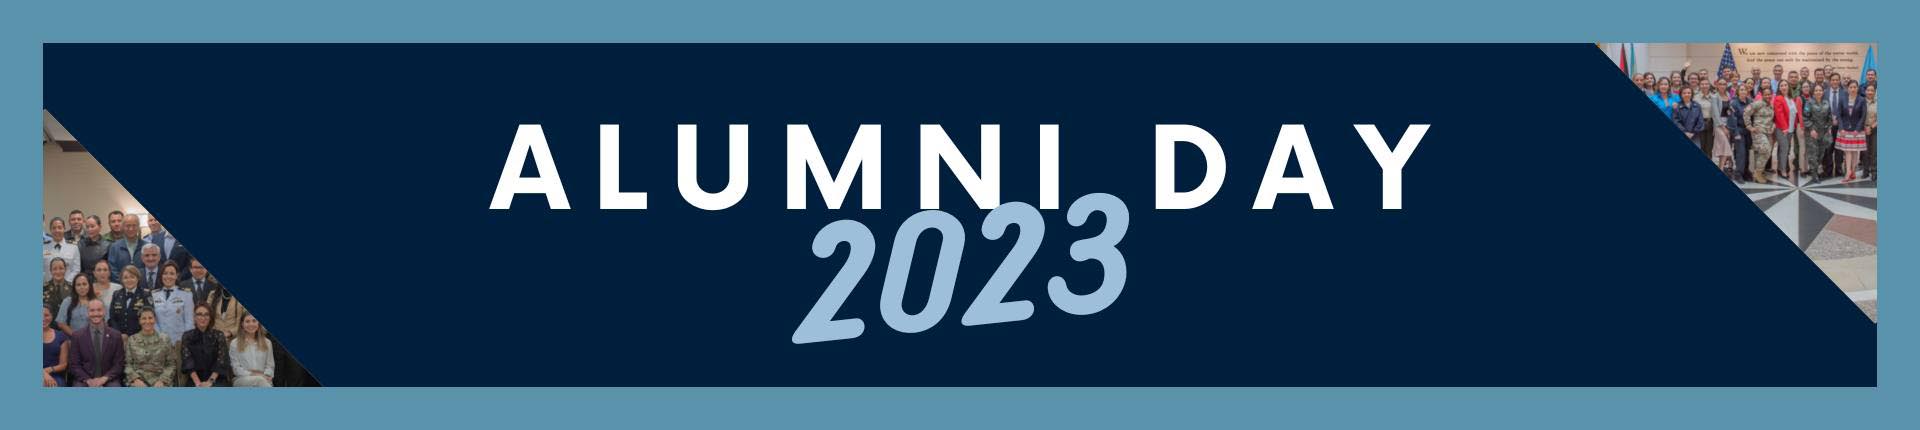 Alumni Day 2023 Website Banners - ENG